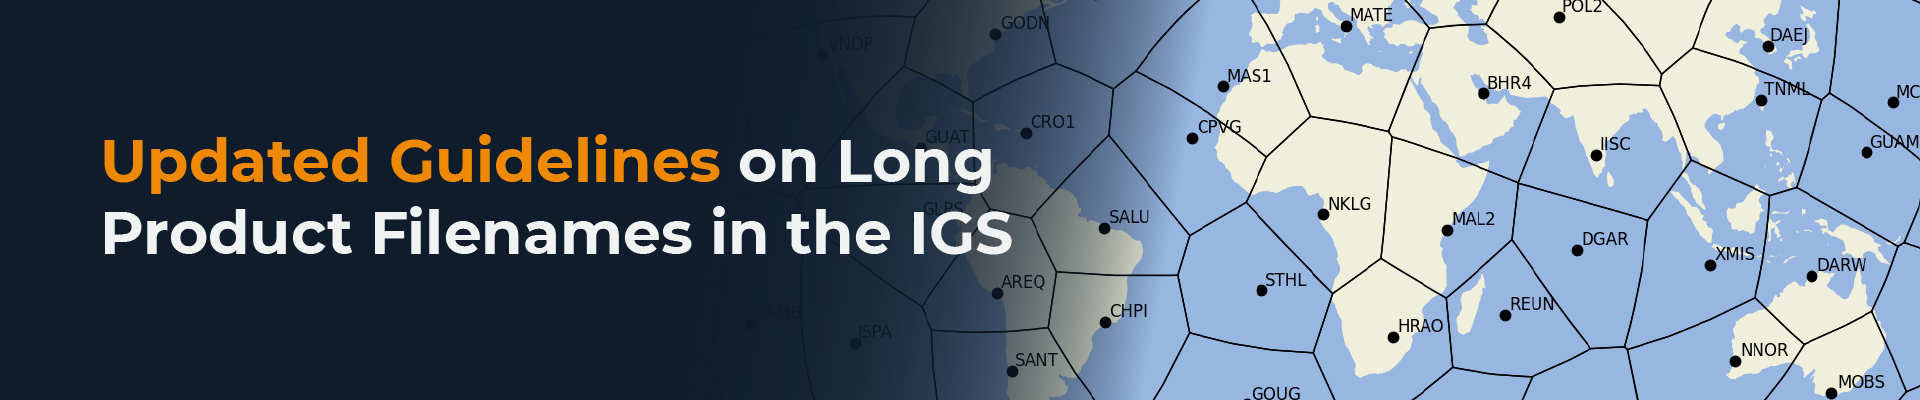 Updated Guidelines on Long Product Filenames in the IGS